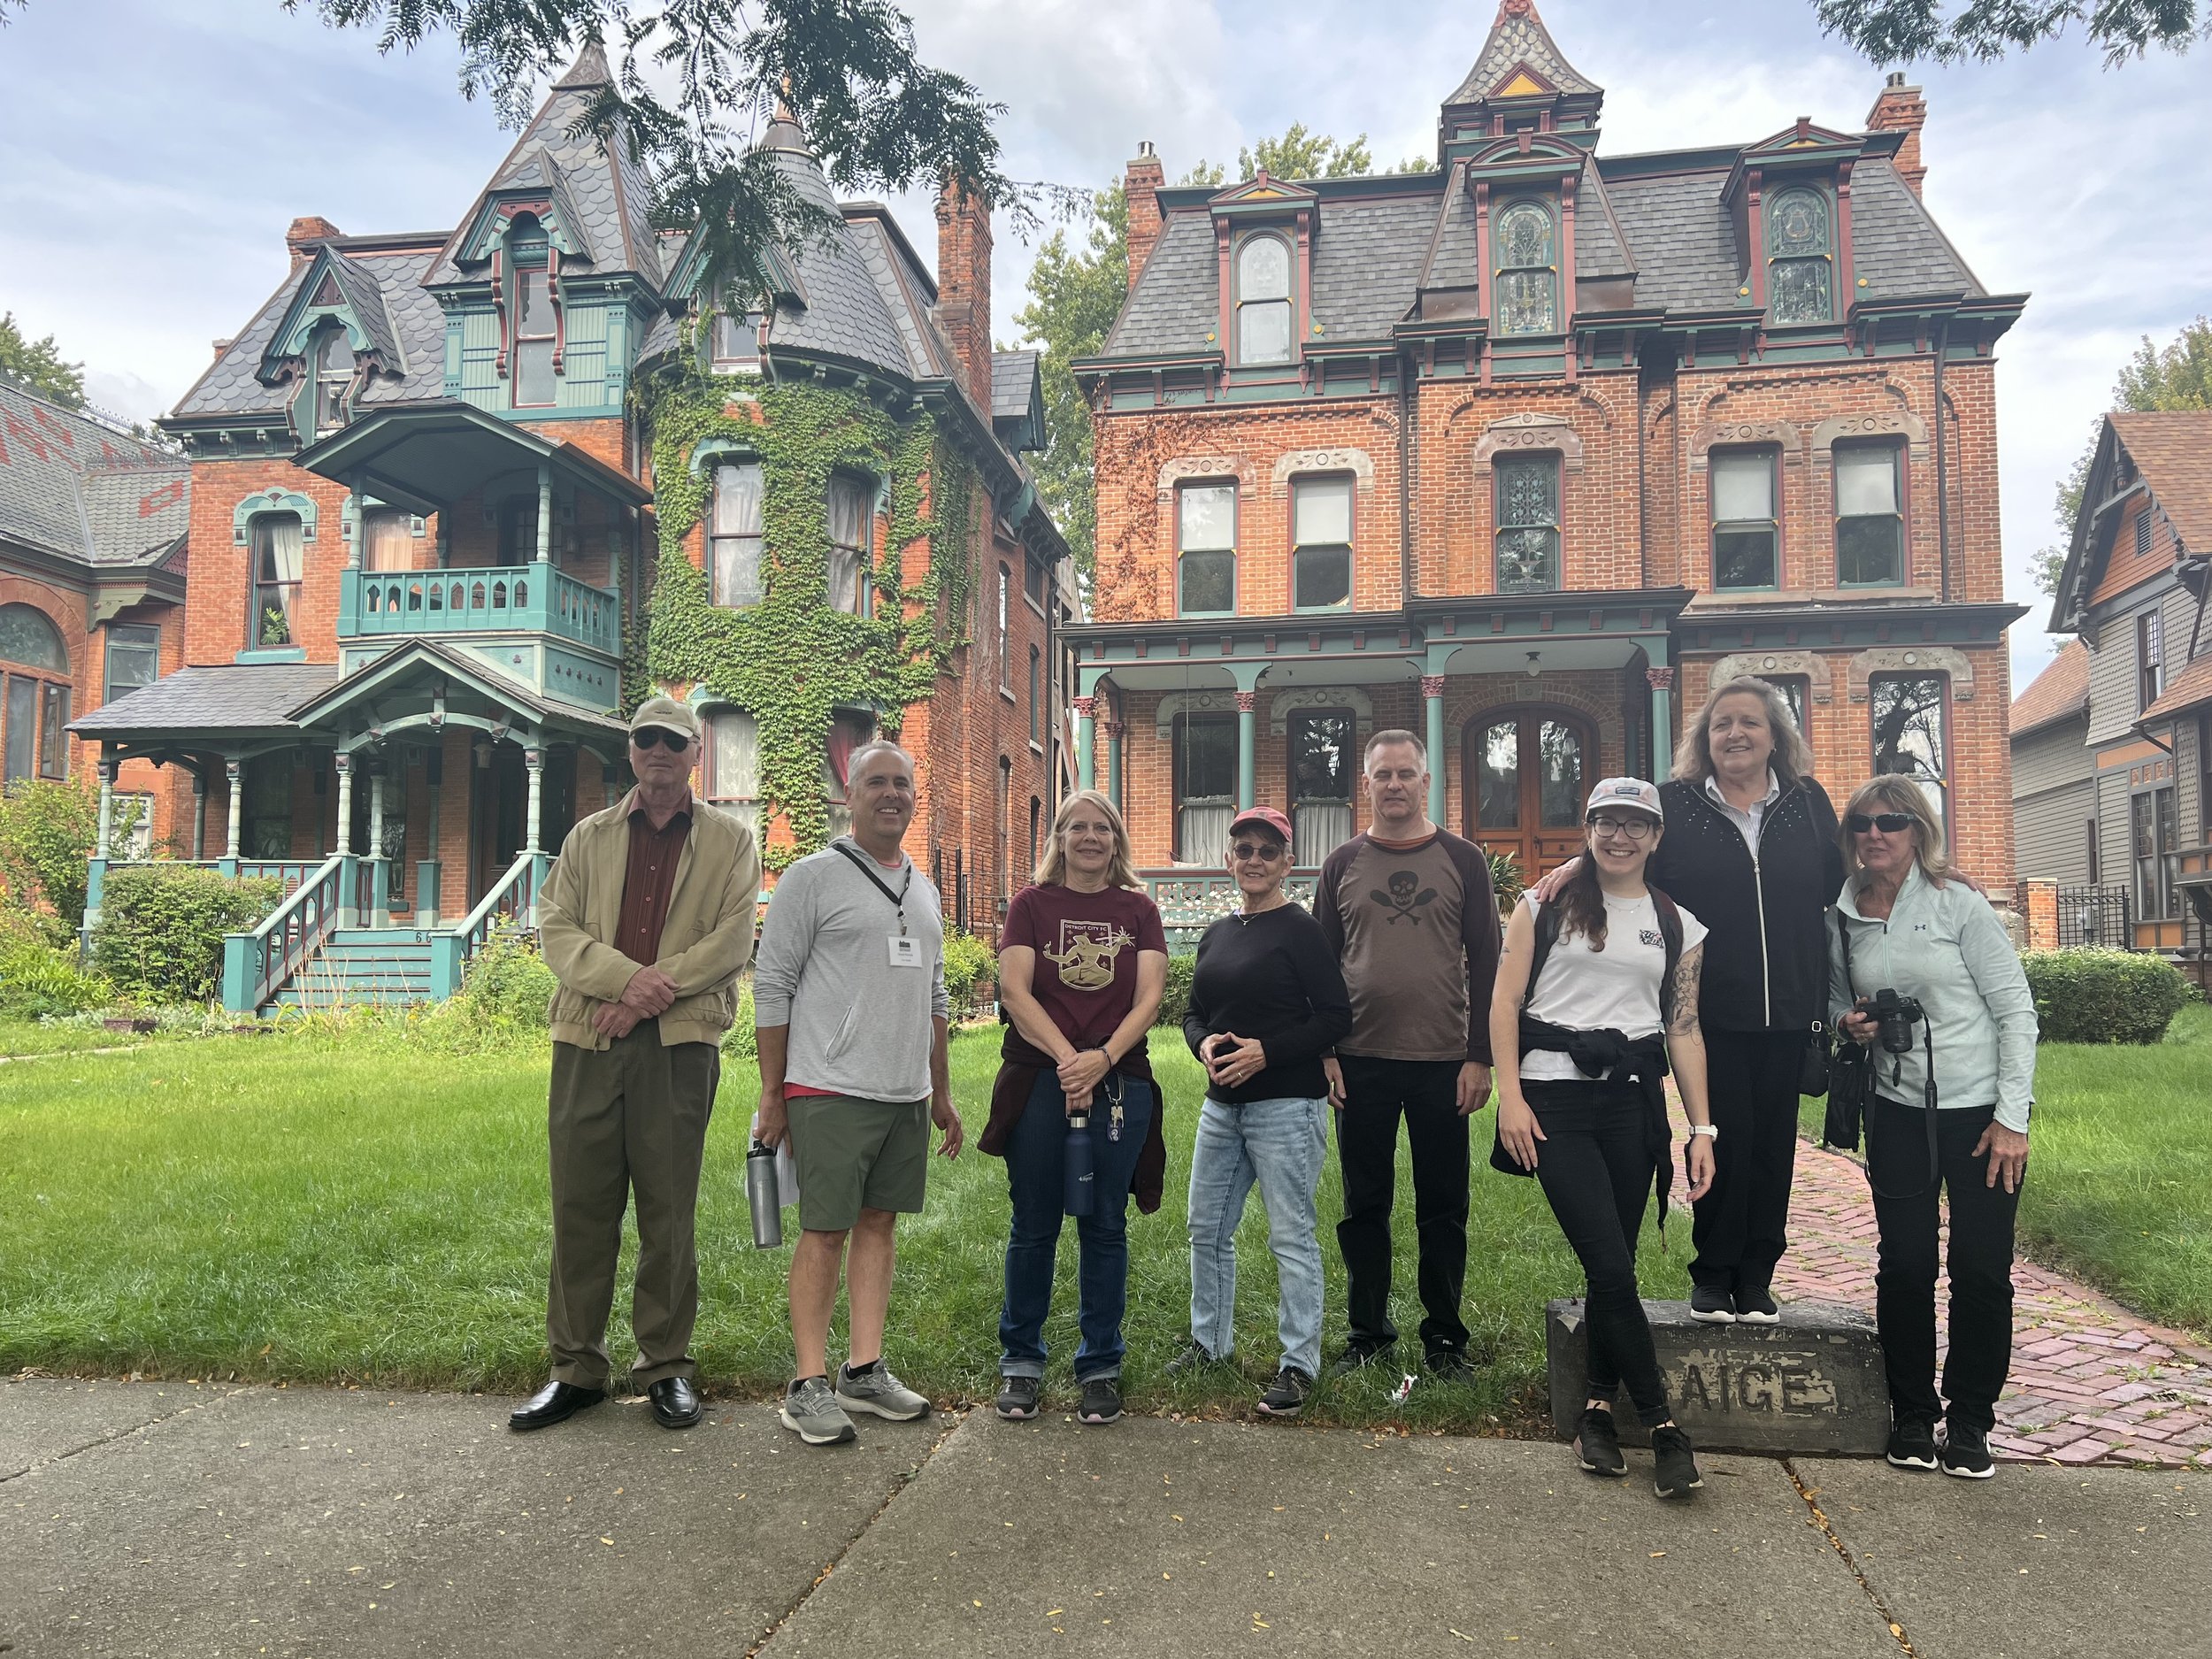 A tour group smiles and stands on the sidewalk in front of a row of historic brick homes on Canfield Street.